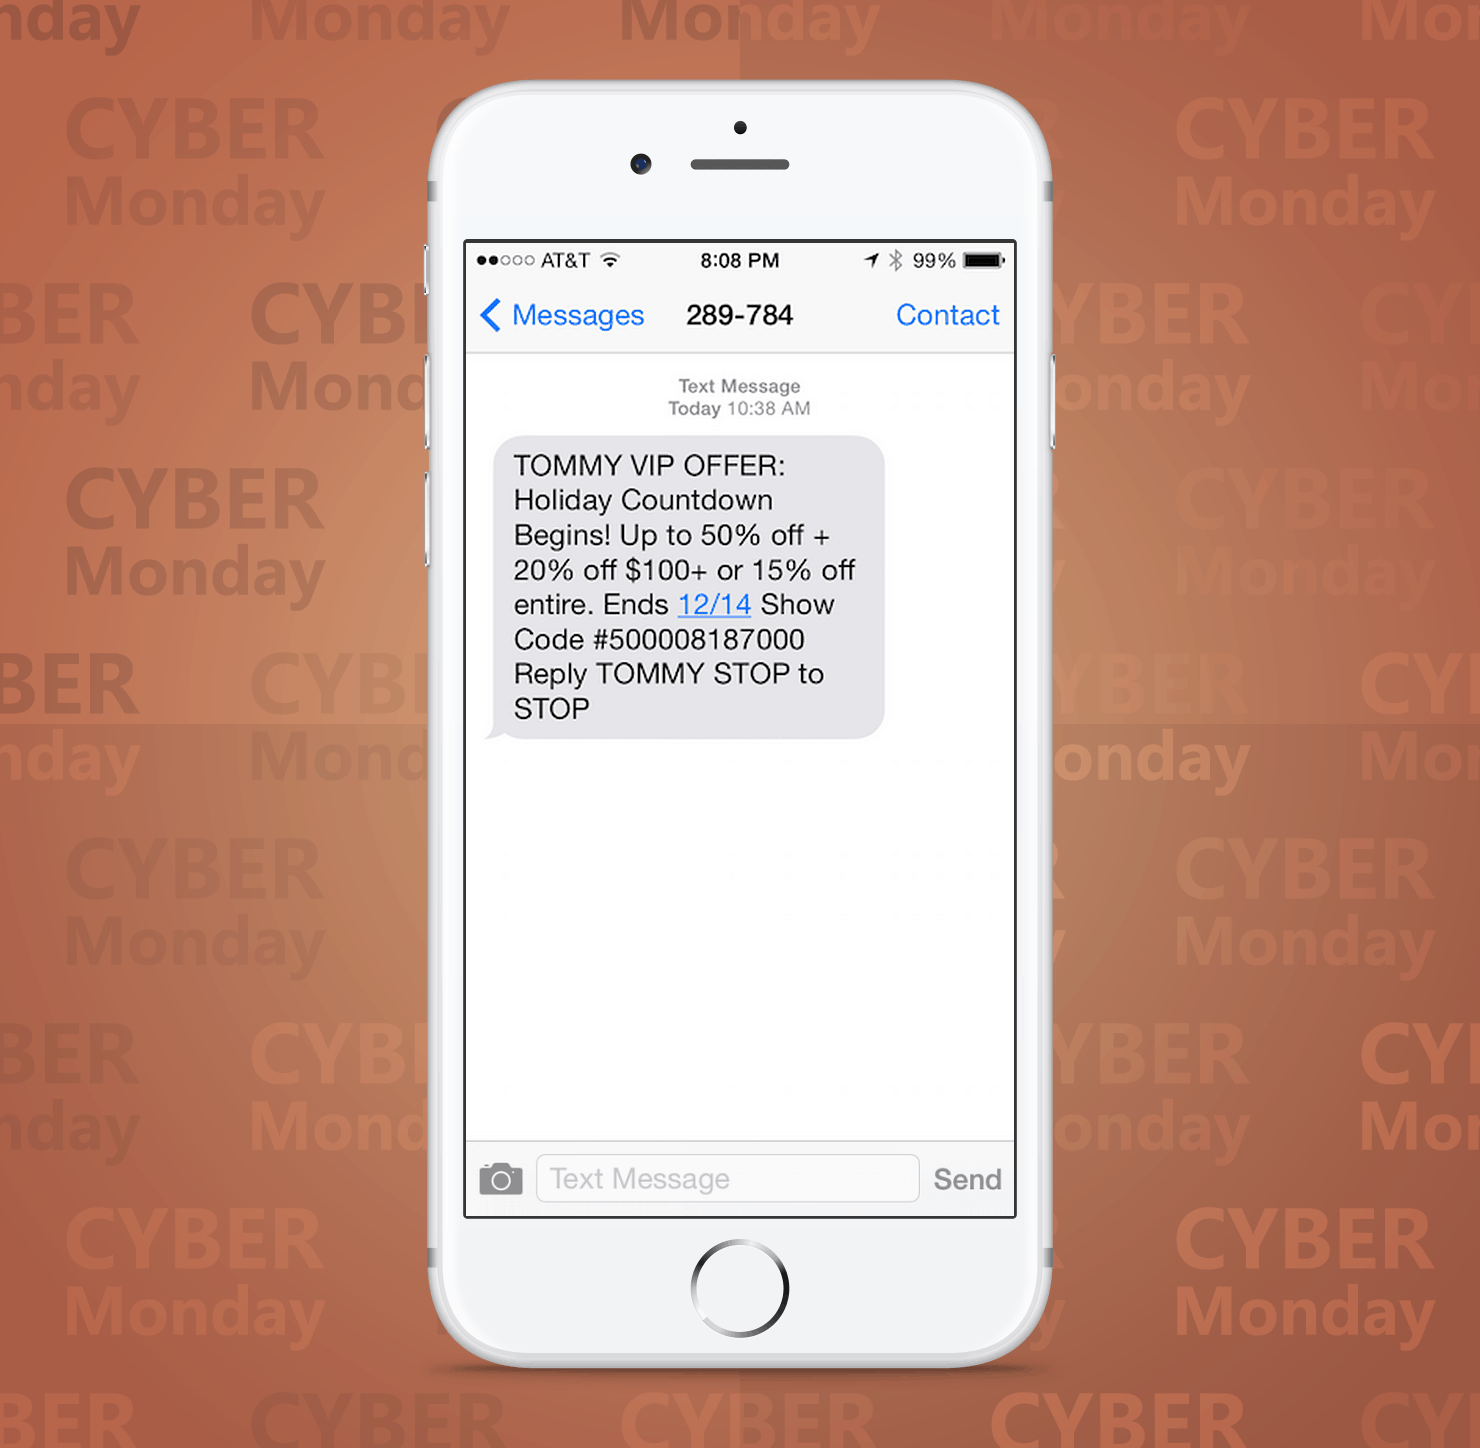 SMS Coupon Example Sent on Cyber Monday From Tommy Bahamas Retail Stores to Customers